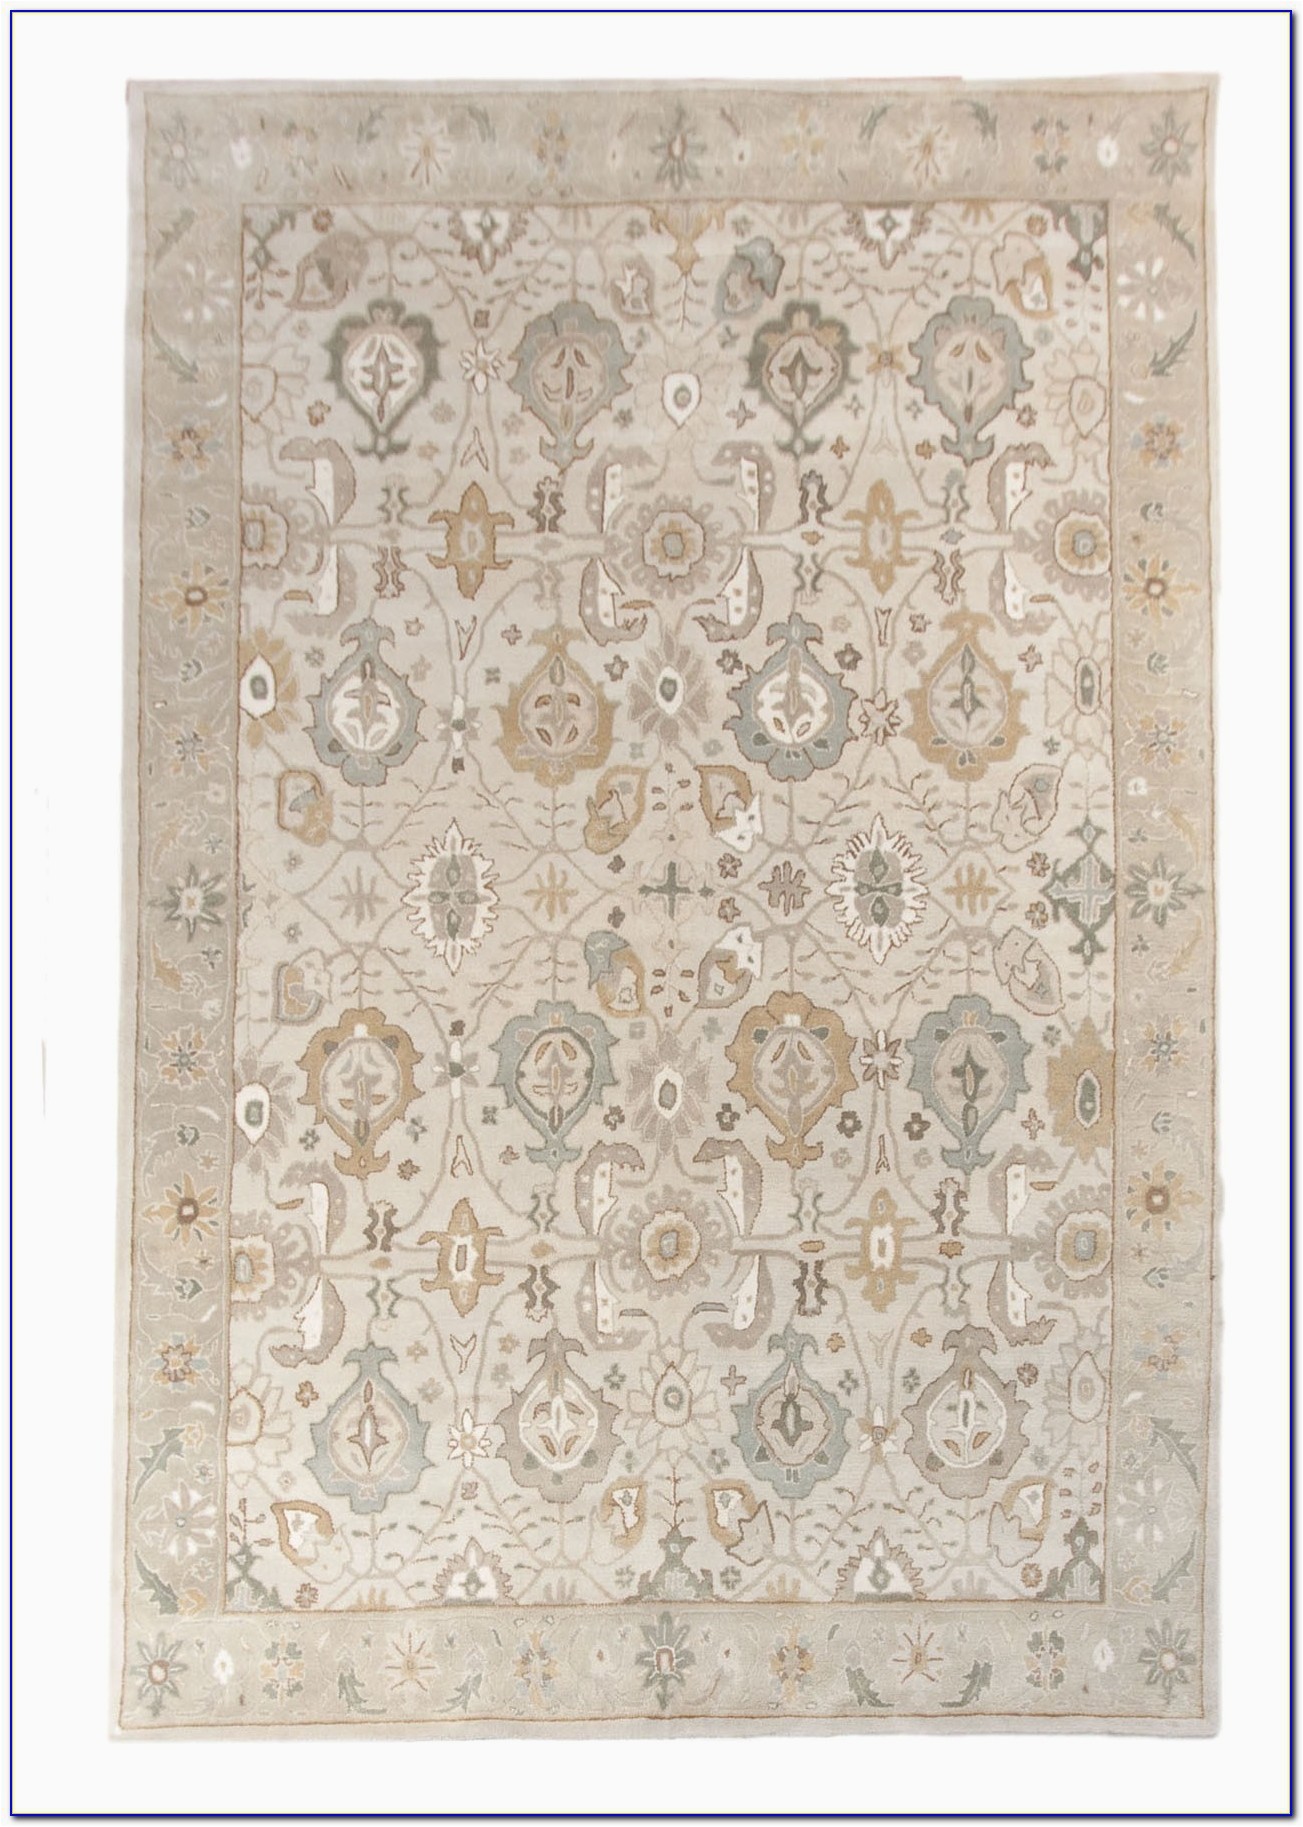 Bed Bath and Beyond Rugs 9×12 Wayfair area Rugs 9×12 Rugs Home Design Ideas Bjzmm7azrv